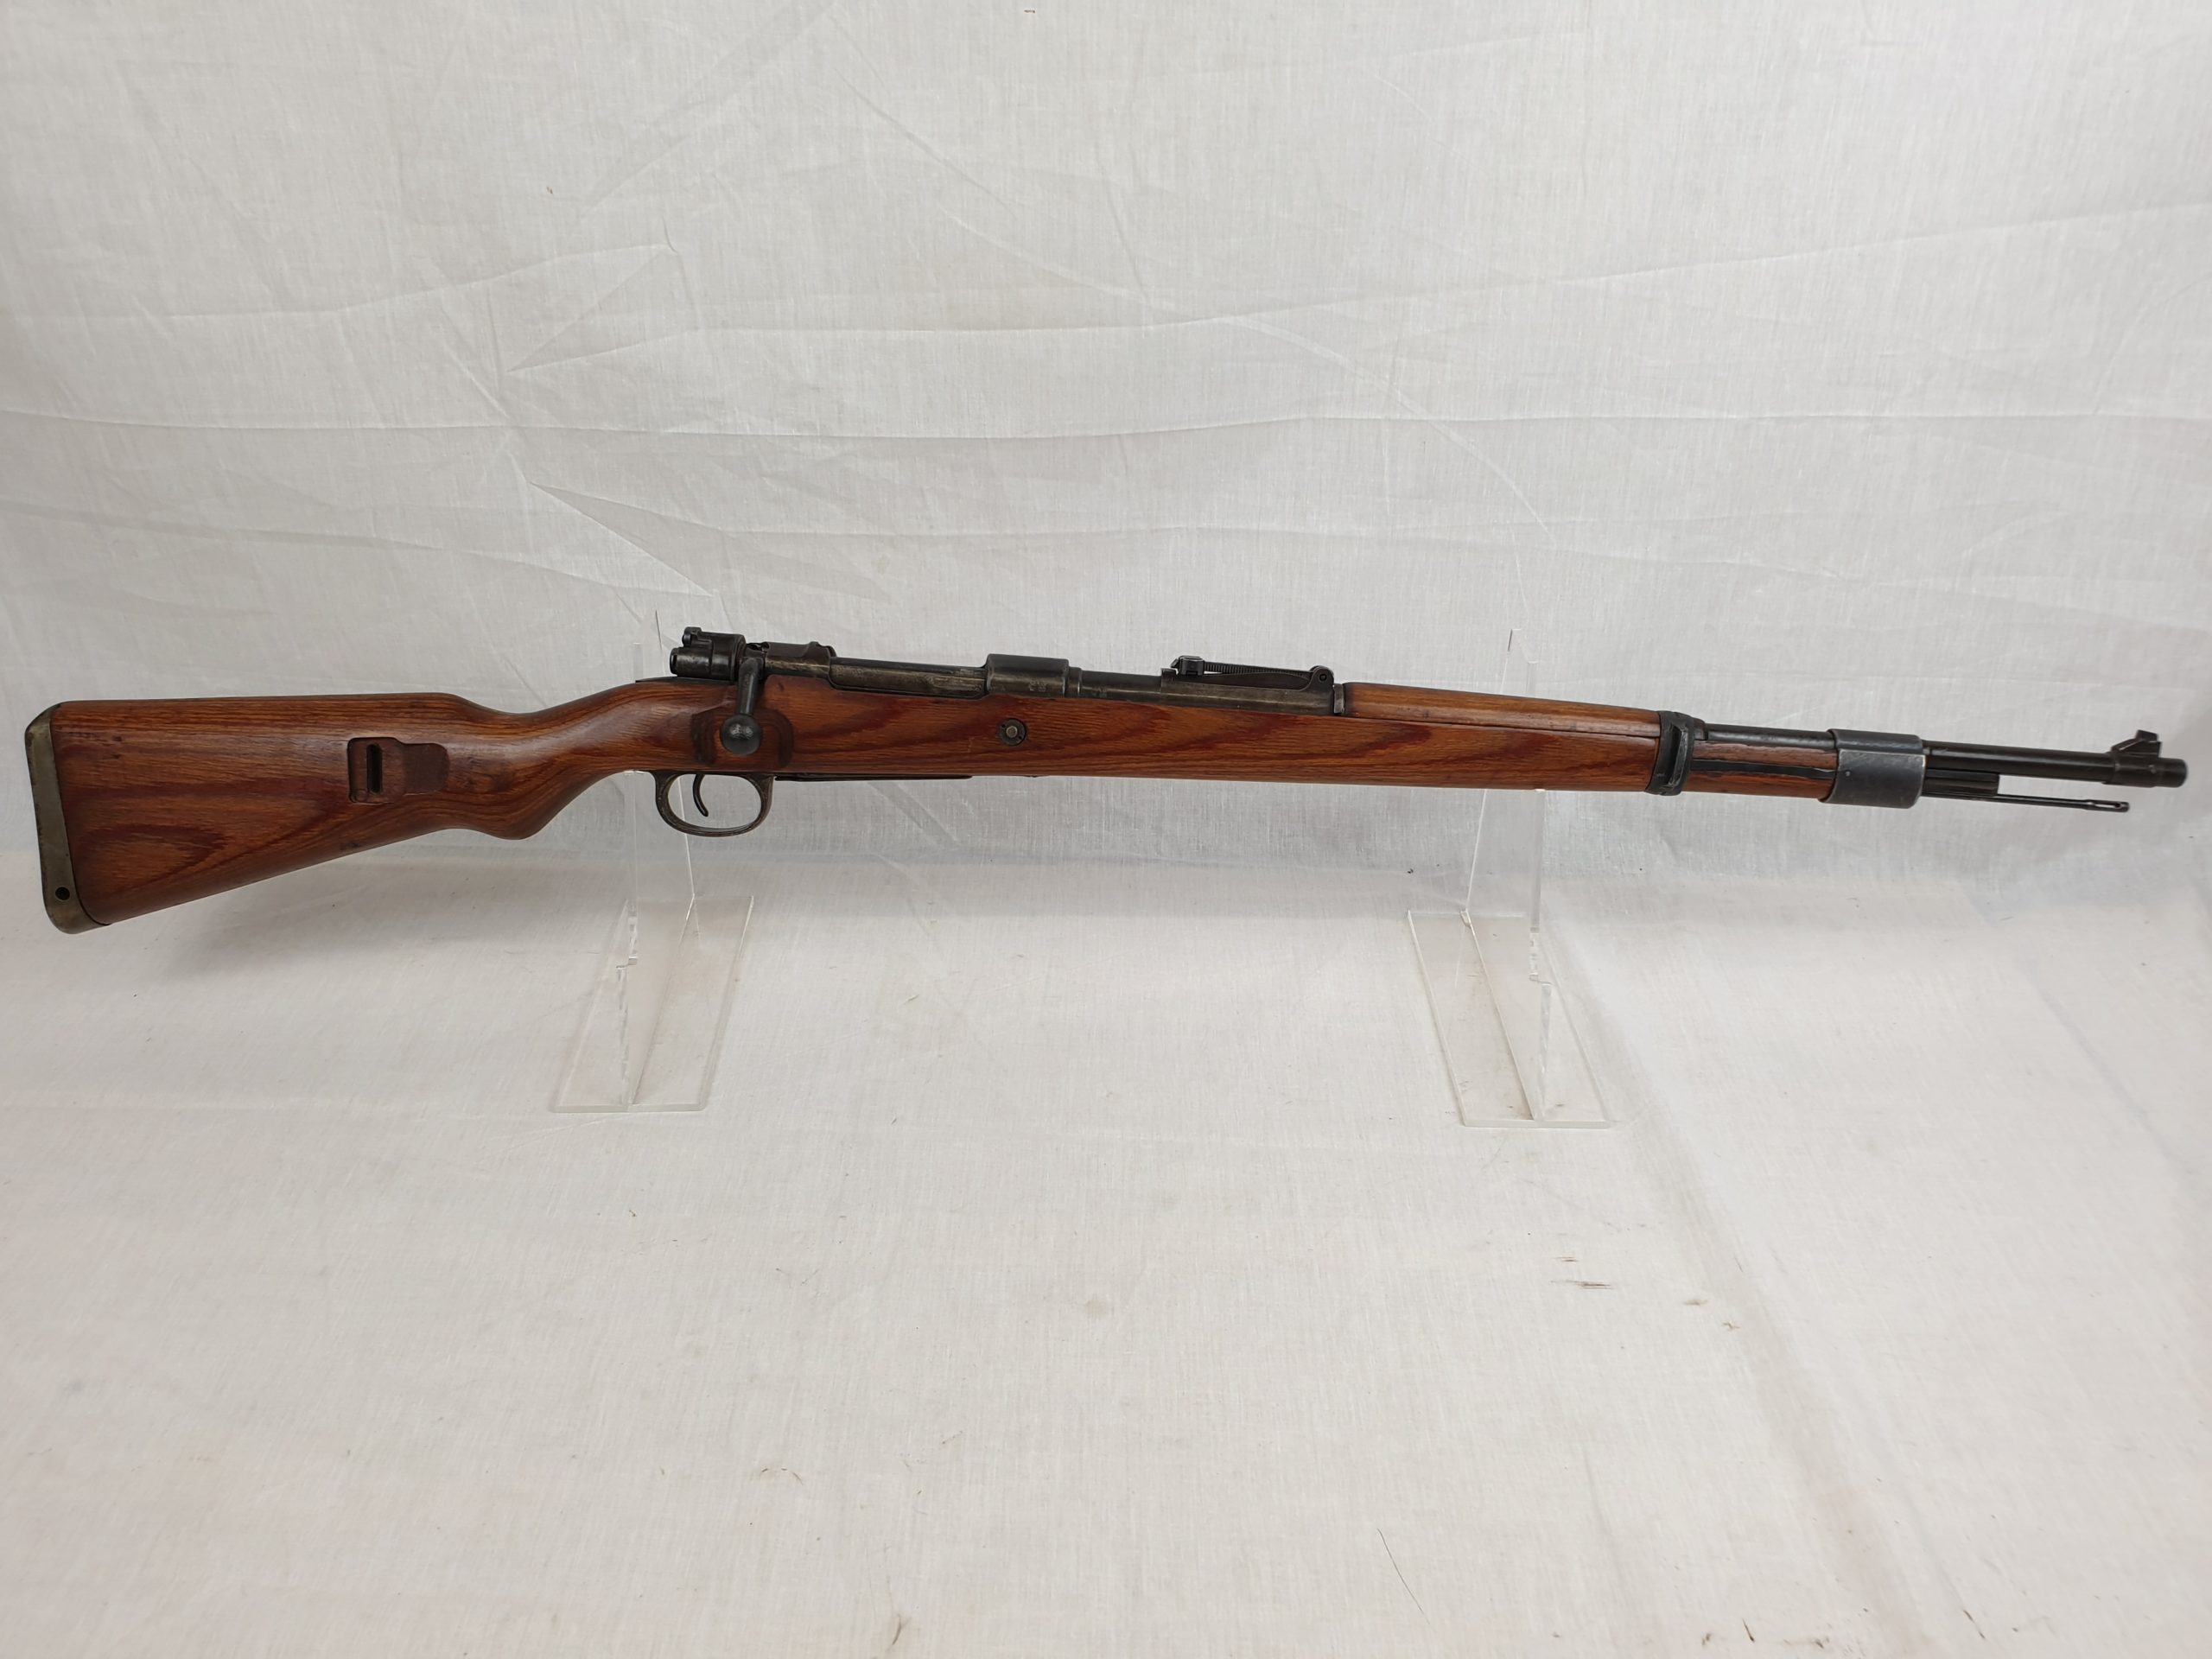 german mauser rifle from ww2